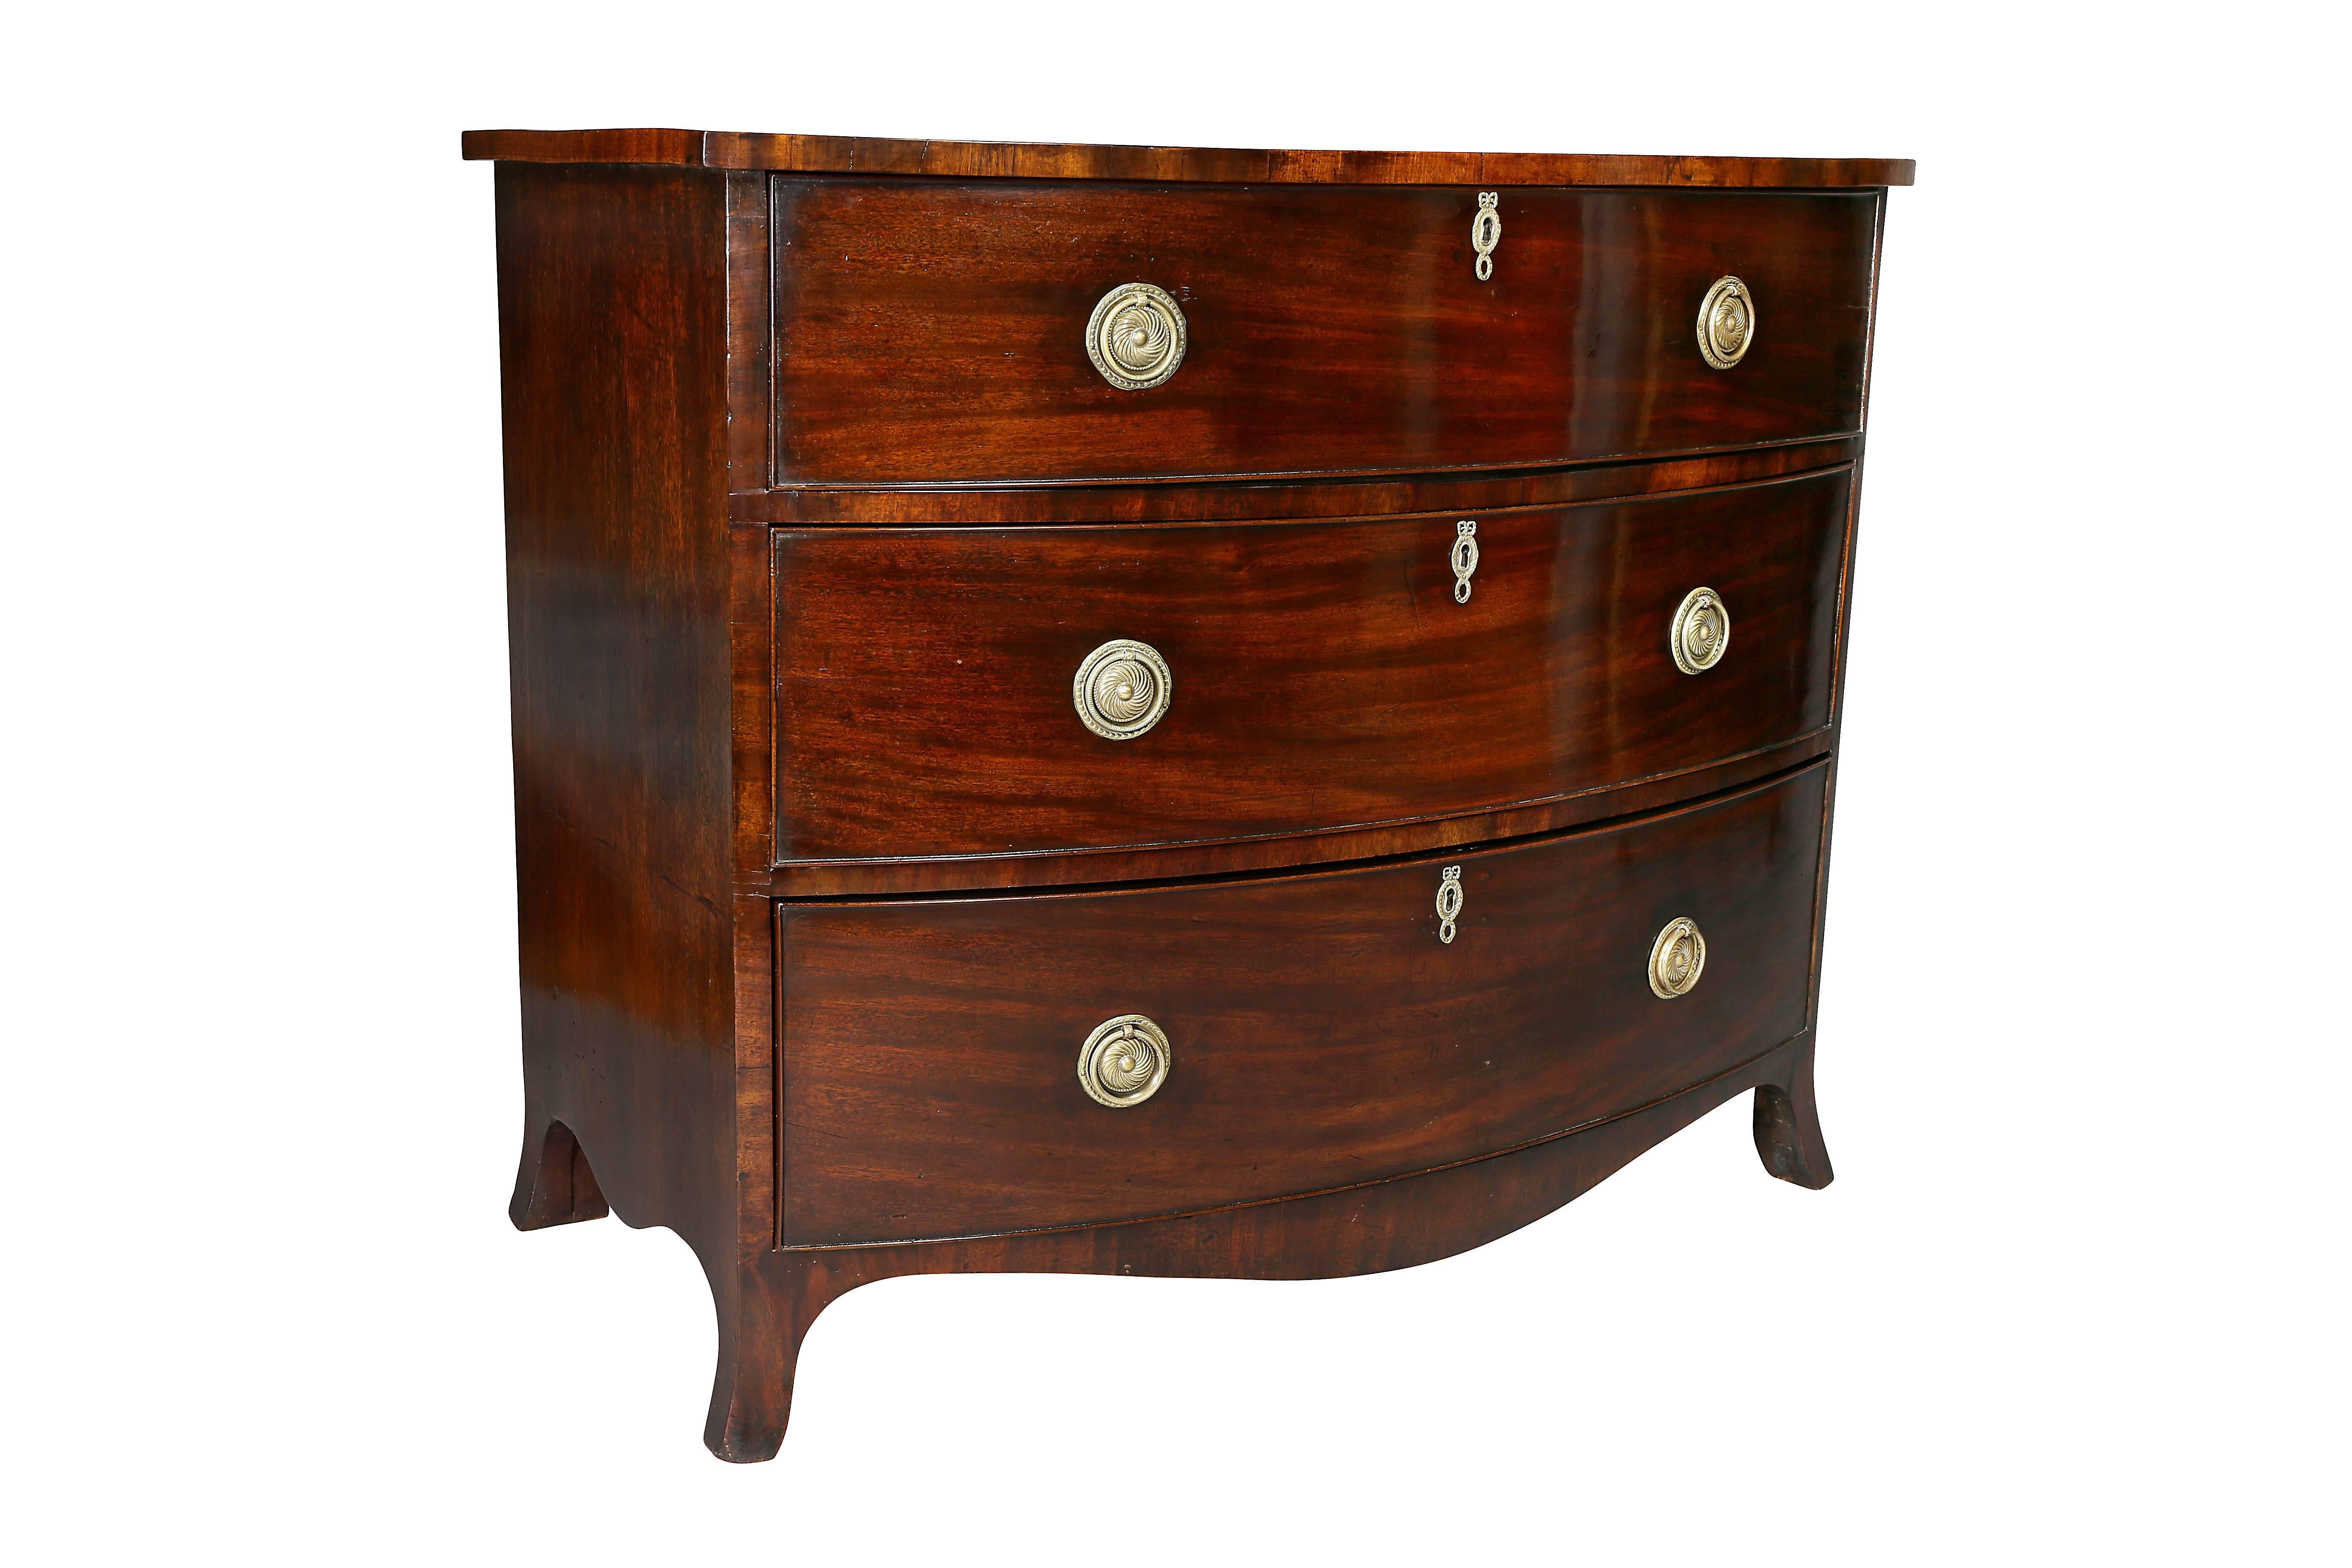 Beautiful color, bow front over three drawers, circular ring handles, splayed legs.